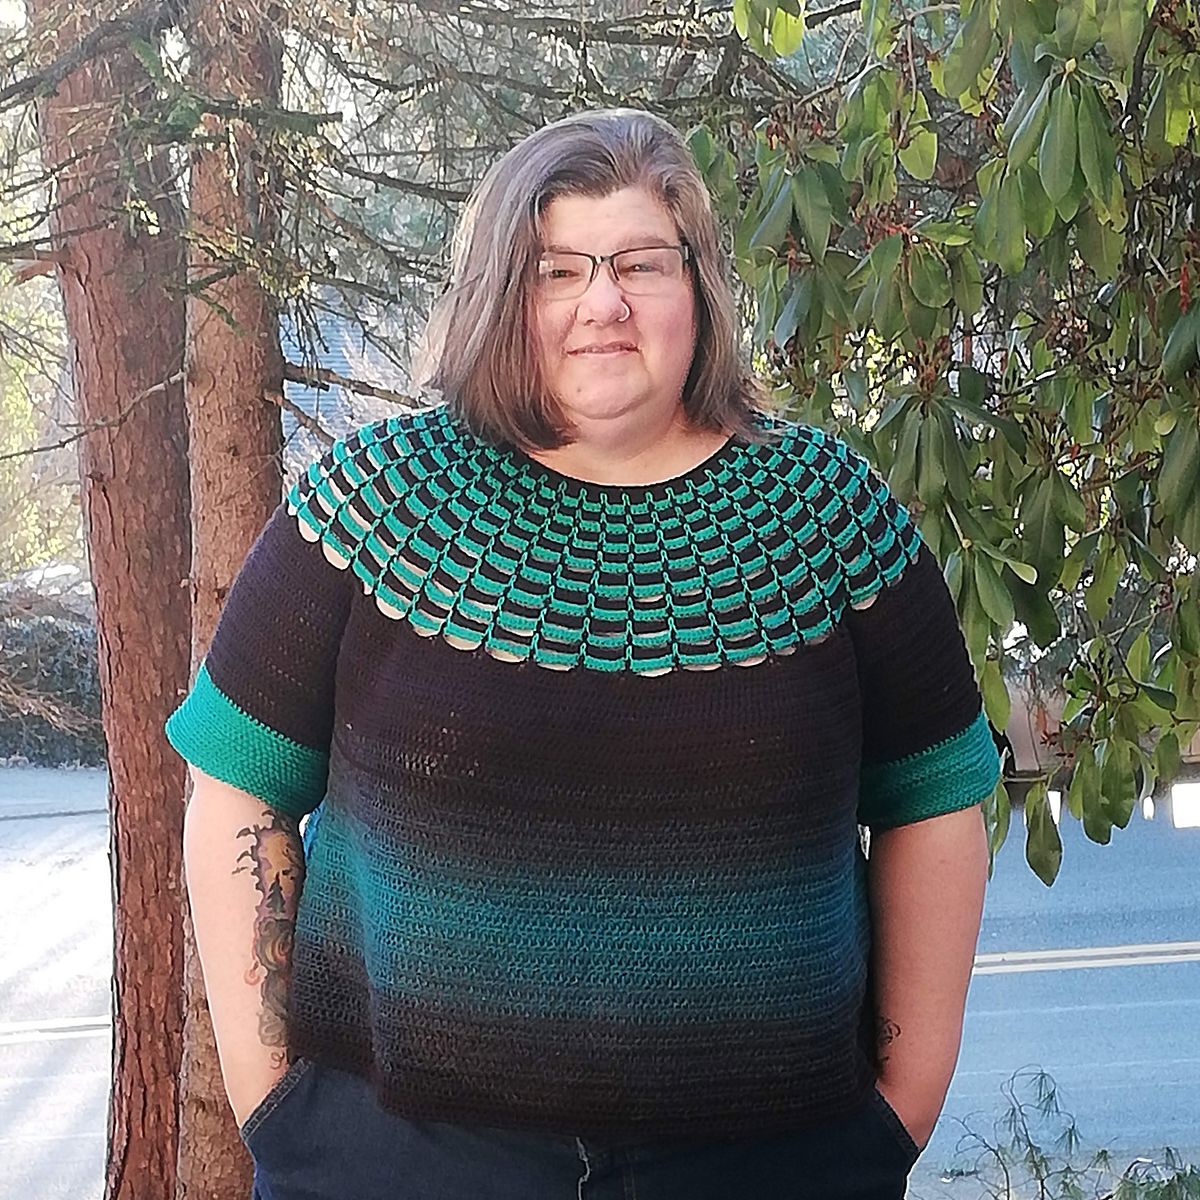 A woman stands in front of a tree, looking at the camera confidently with a small smile. Her crocheted sweater has gradient colors of black and teal on the bottom, and the yoke is worked in an open textured pattern with stripes of black and turquoise.